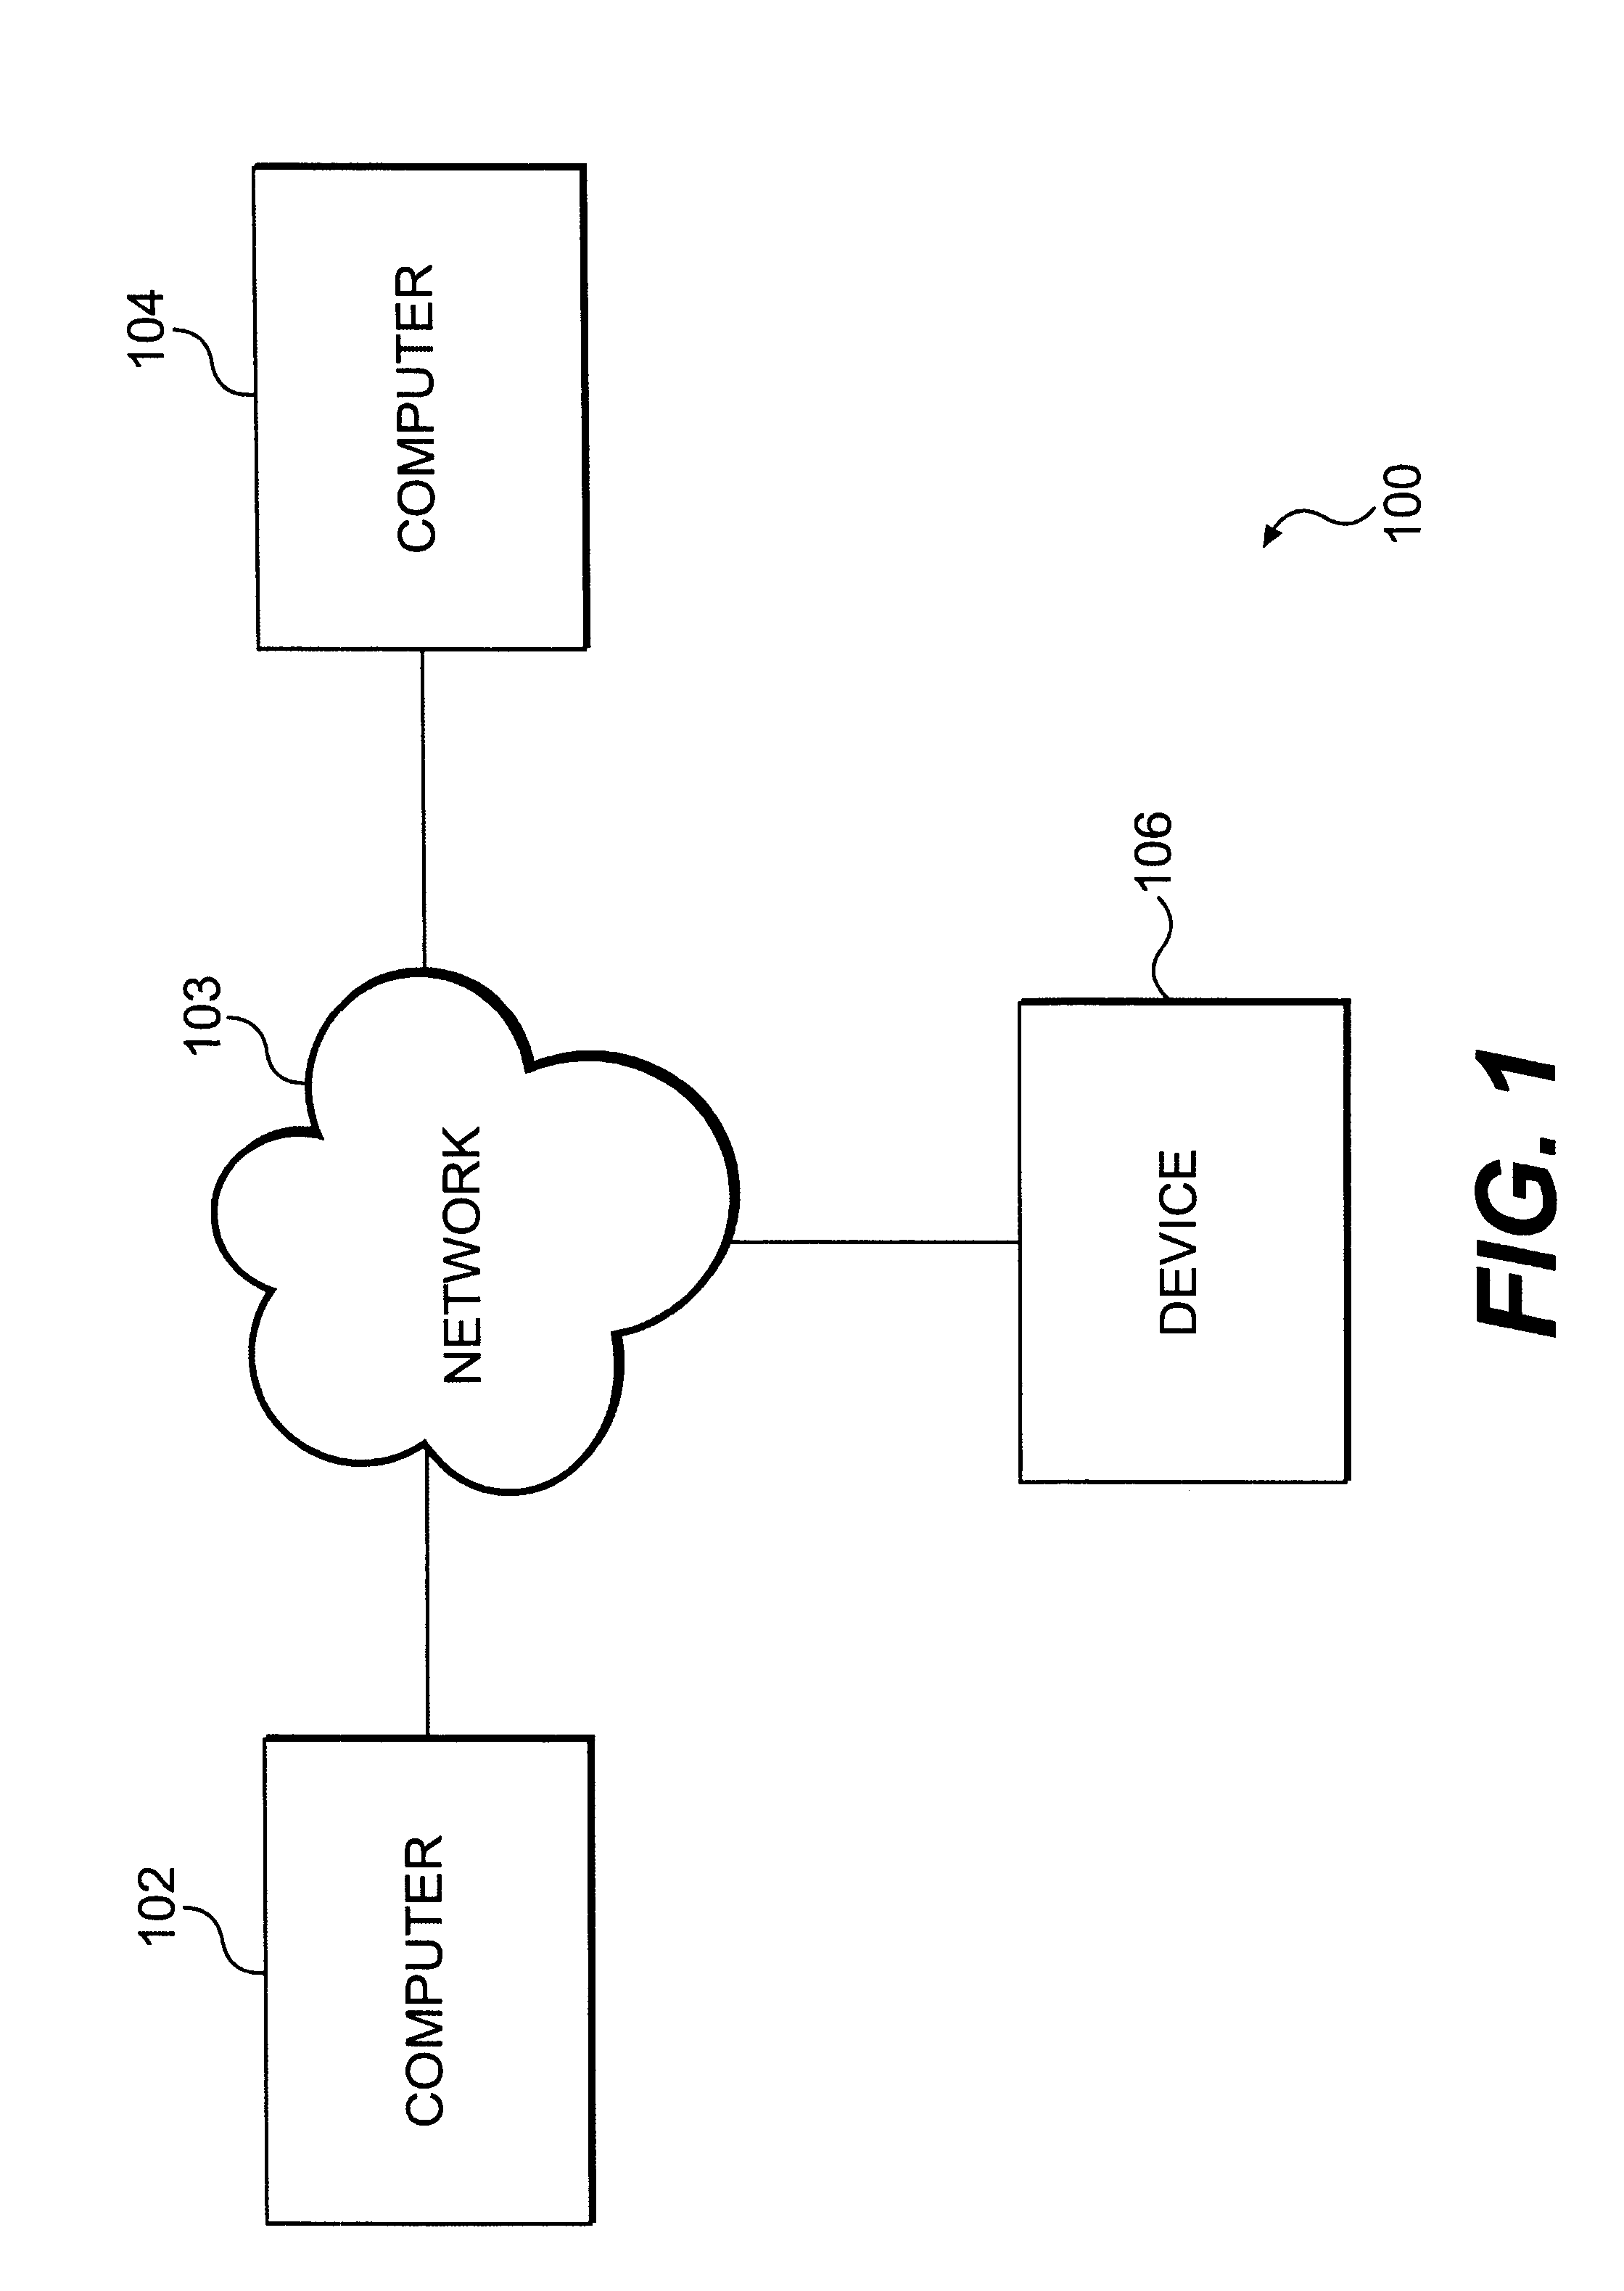 Method and apparatus for determining status of remote objects in a distributed system